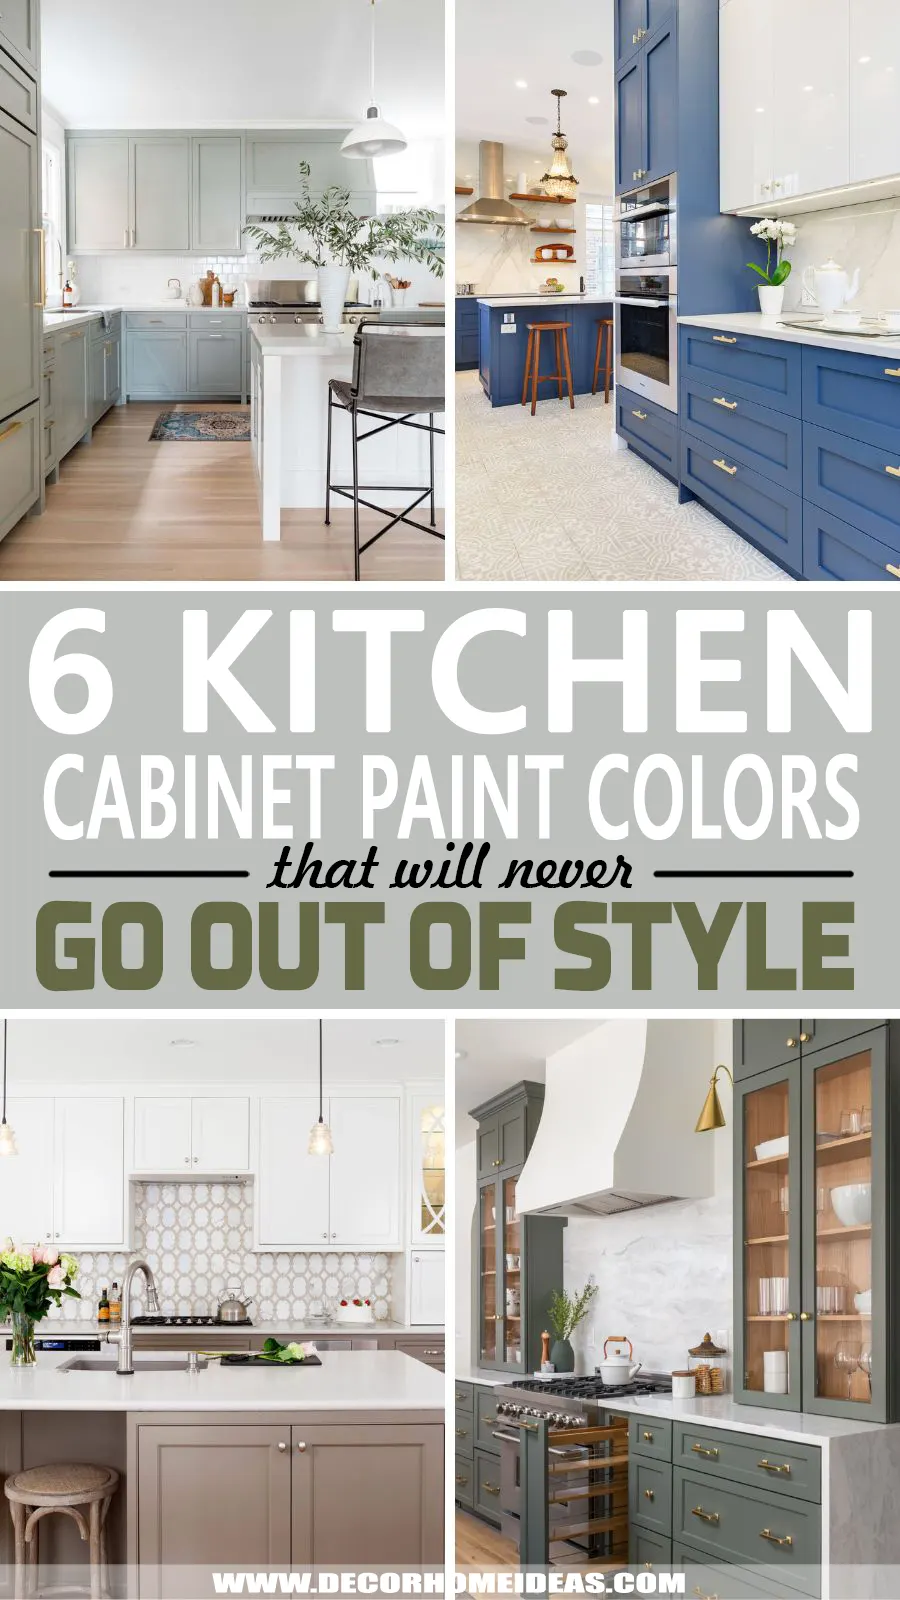 Best Kitchen Cabinet Paint Colors Trends. Consider the best kitchen cabinet paint colors for your next makeover as you probably will live with them for quite a few years. Choose neutral and earth-toned shades or pale and pastel colors as they can withstand the time.